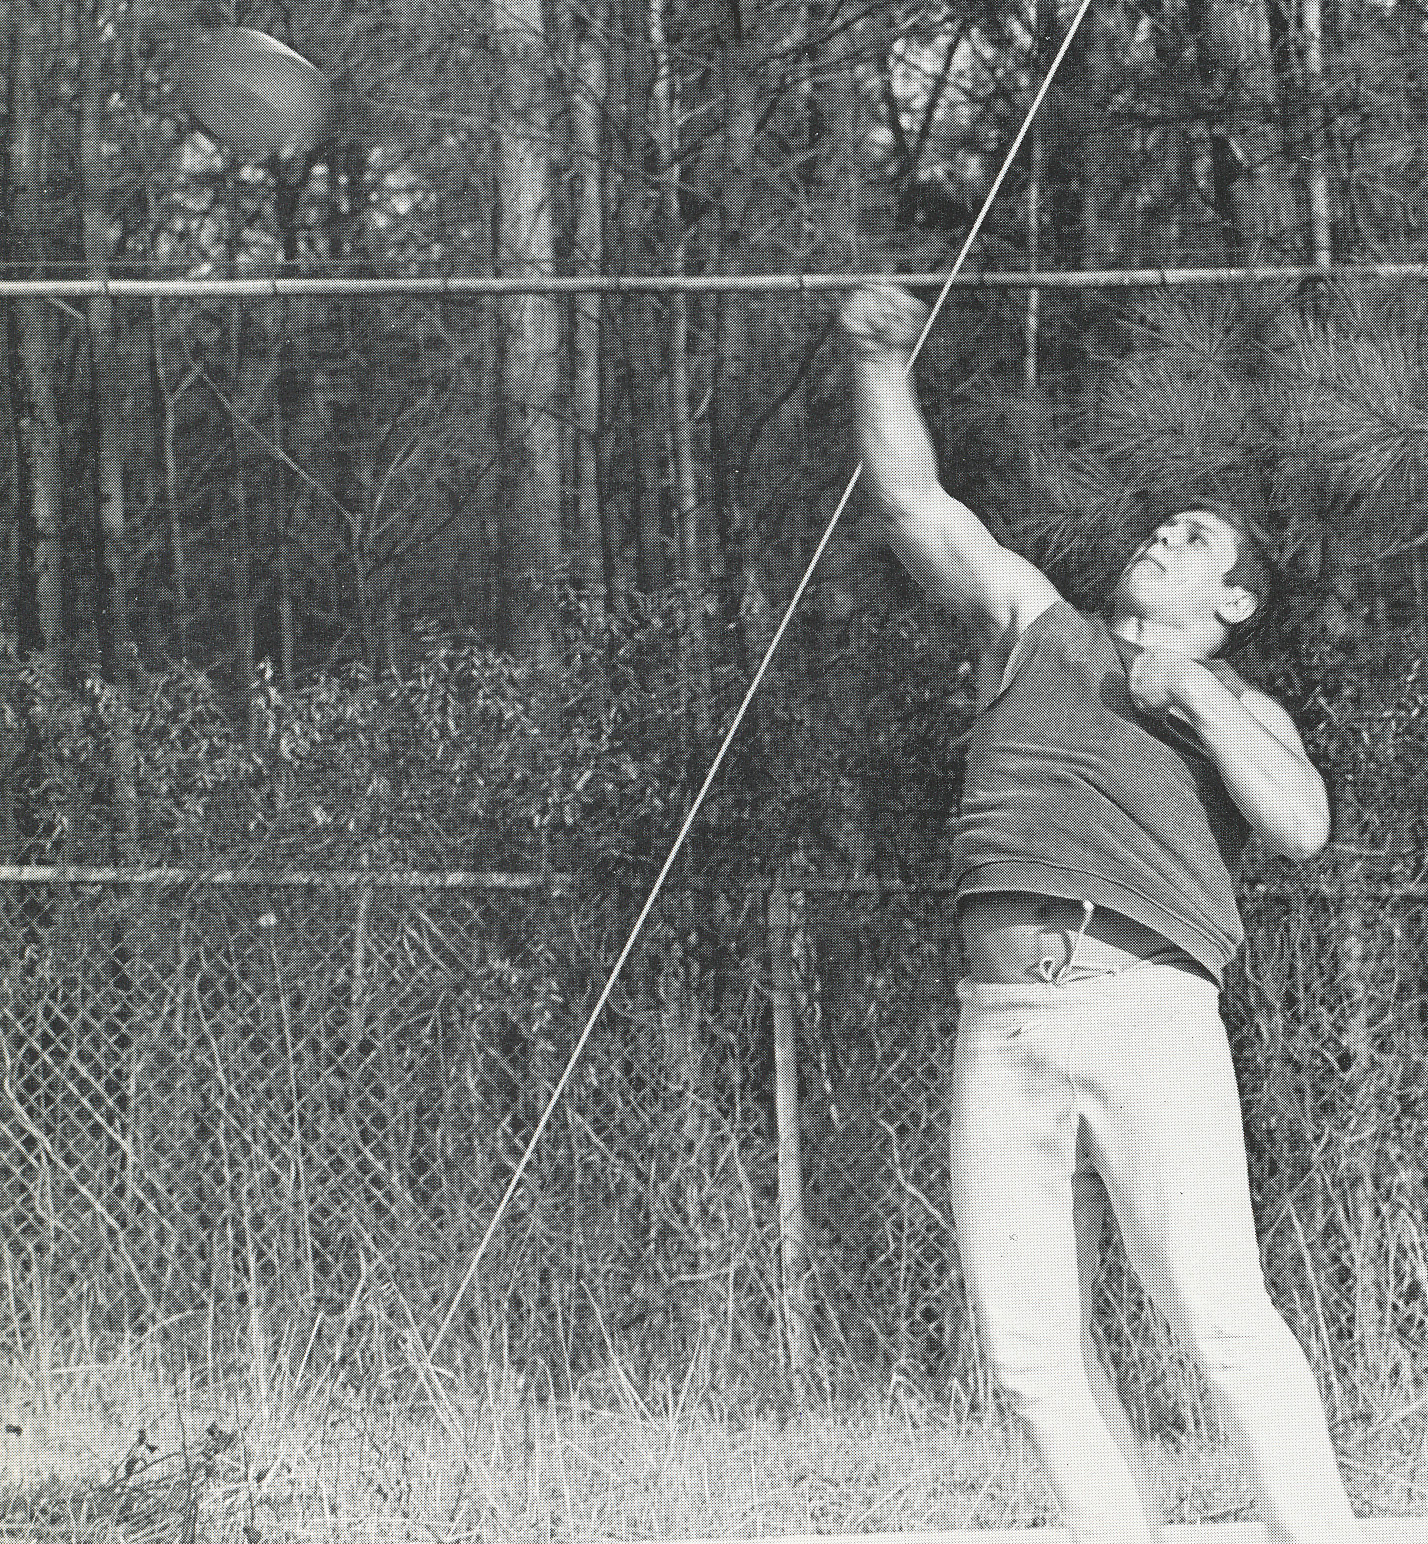 JOEY TINSLEY DEMONSTRATES PERFECT FORM THROWING THE DISCUS.
(Click to enlarge.)